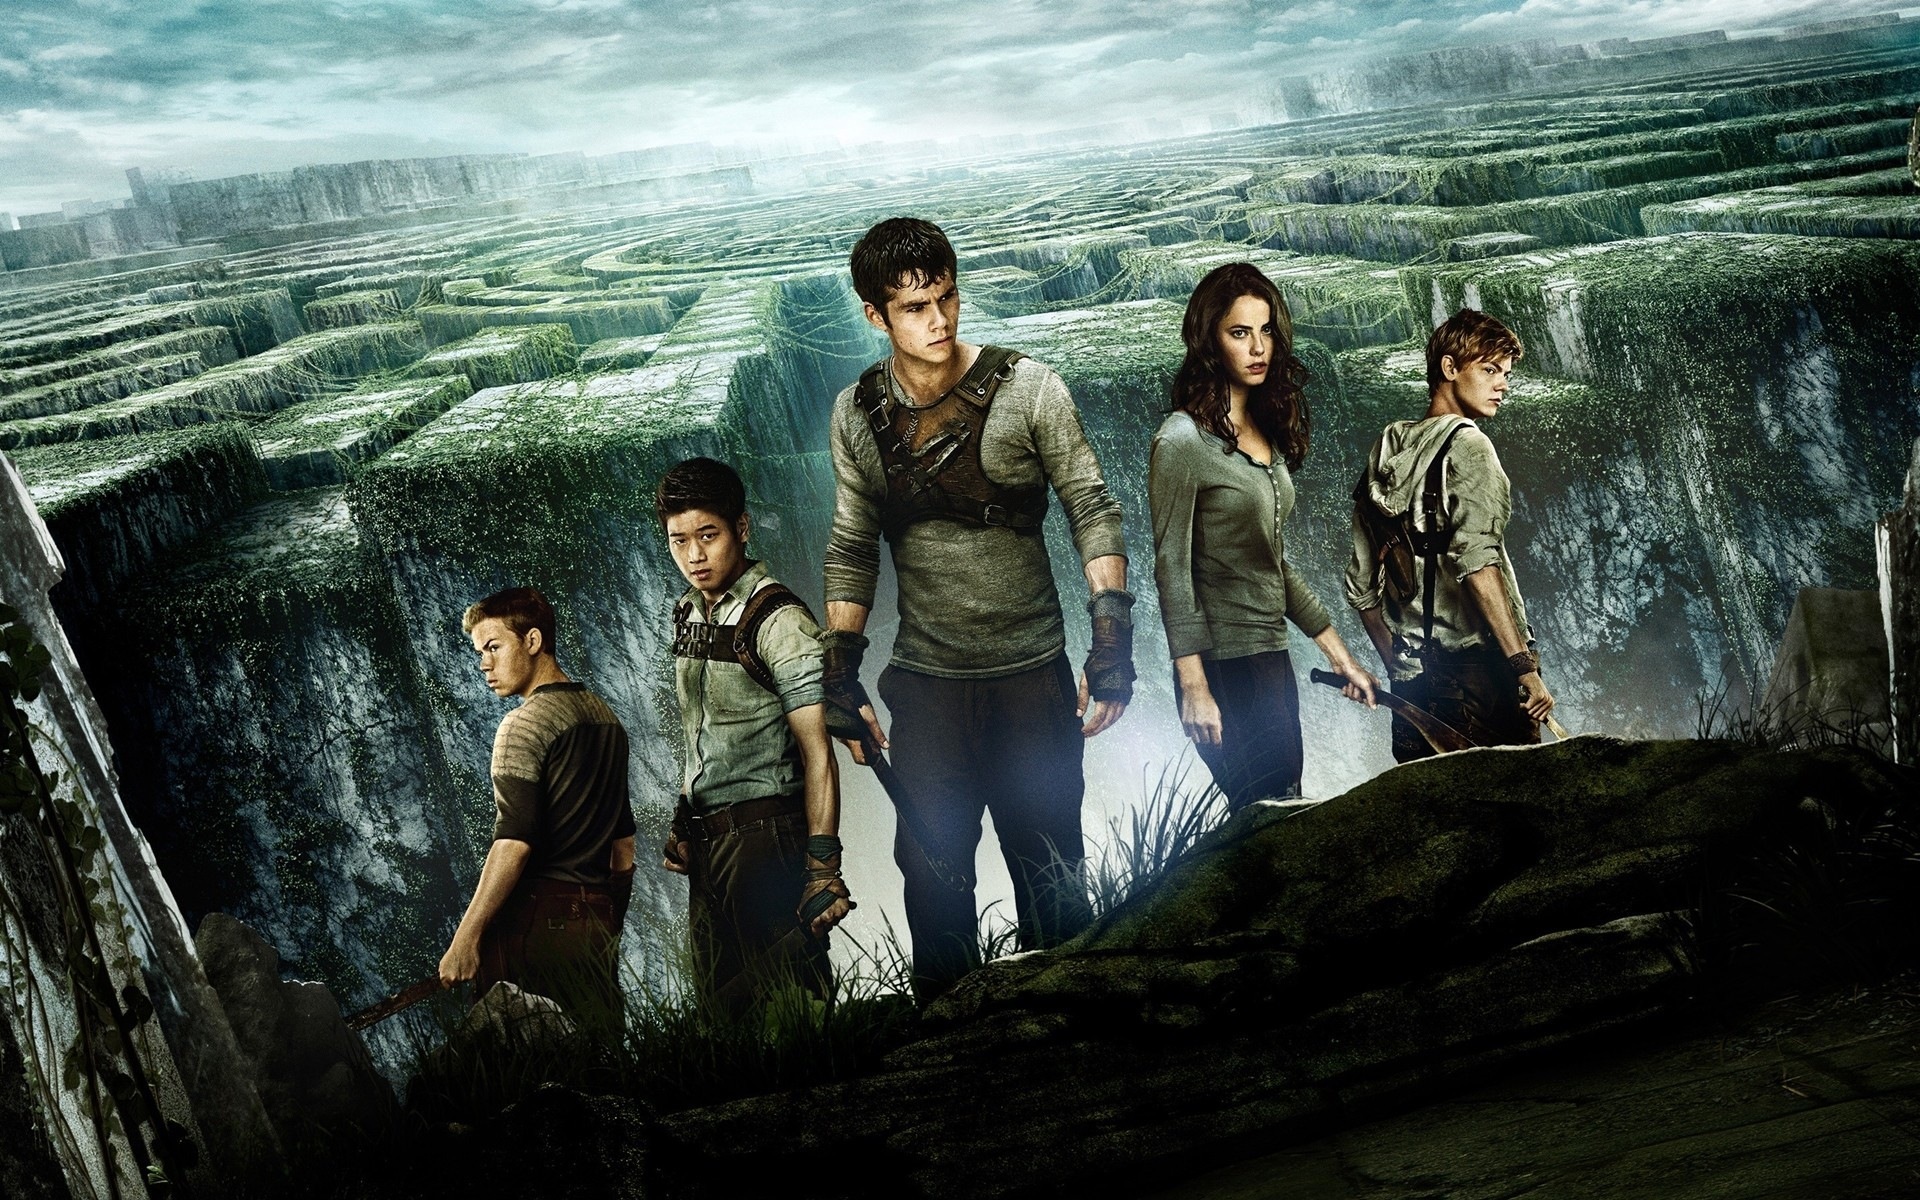 The Maze Runner HD movie wallpapers #1 - 1920x1200